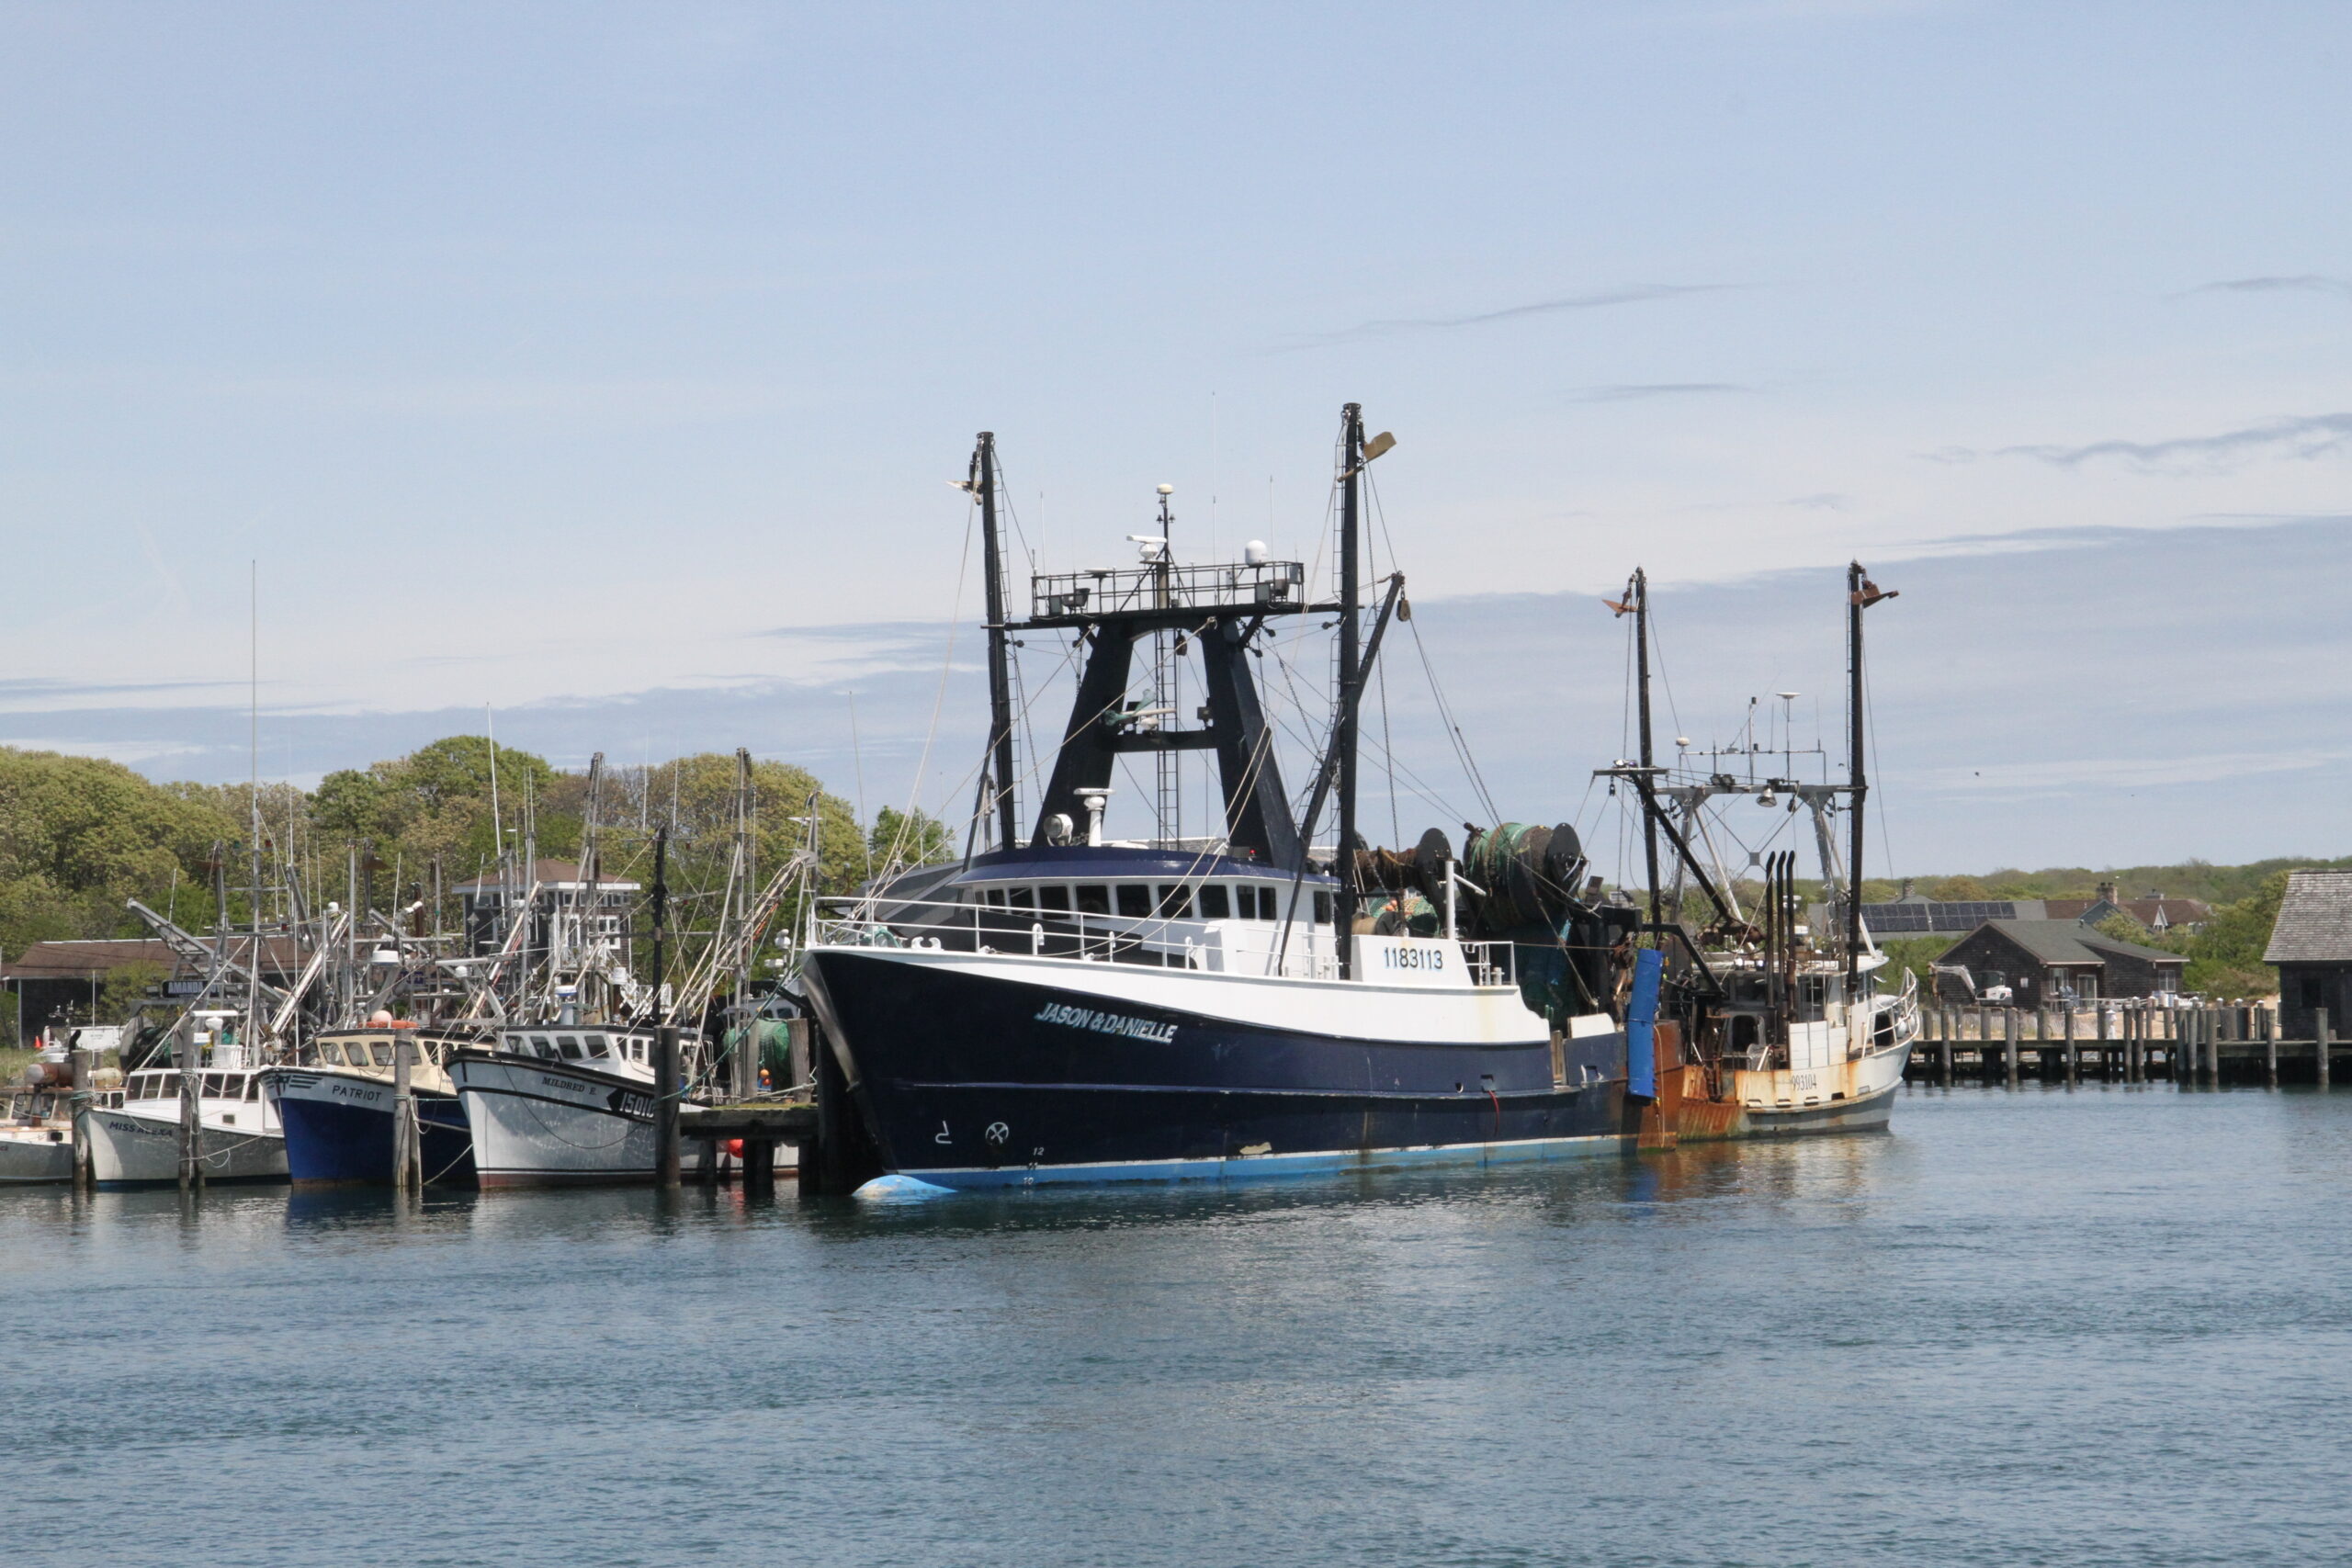 The Jason & Danielle, Montauk's largest commercial fishing vessel, harvests about 25 percent of its annual catch from the waters above Hudson Canyon, one of its owners, Capt. Hank Lackner, says.